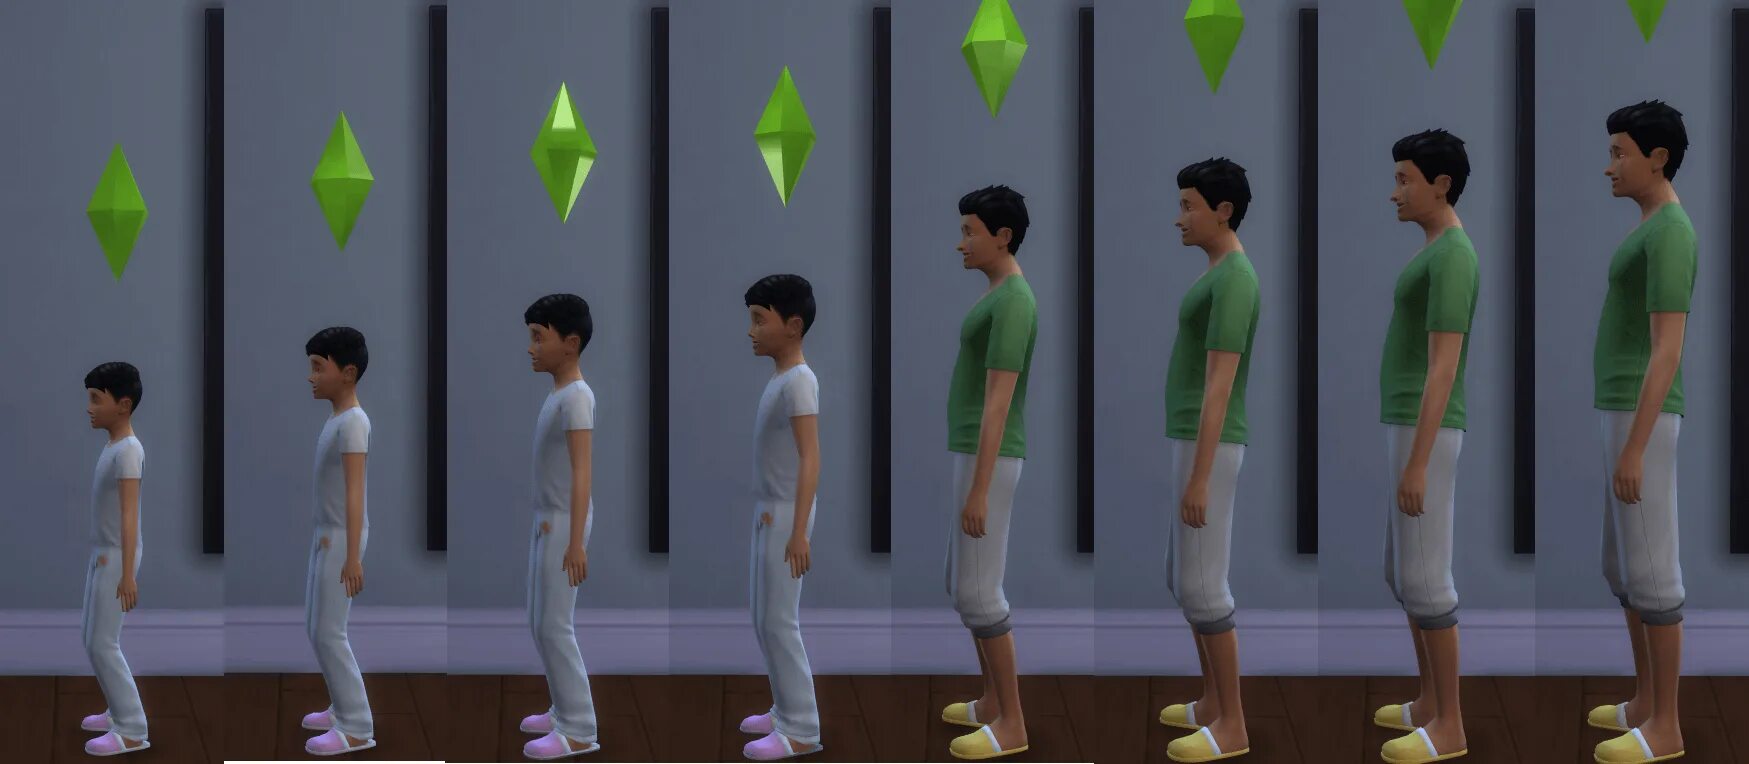 Sims atf. ATF Mods SIMS 4. ATF children Mod SIMS 4. SIMS 4 мод на рост.